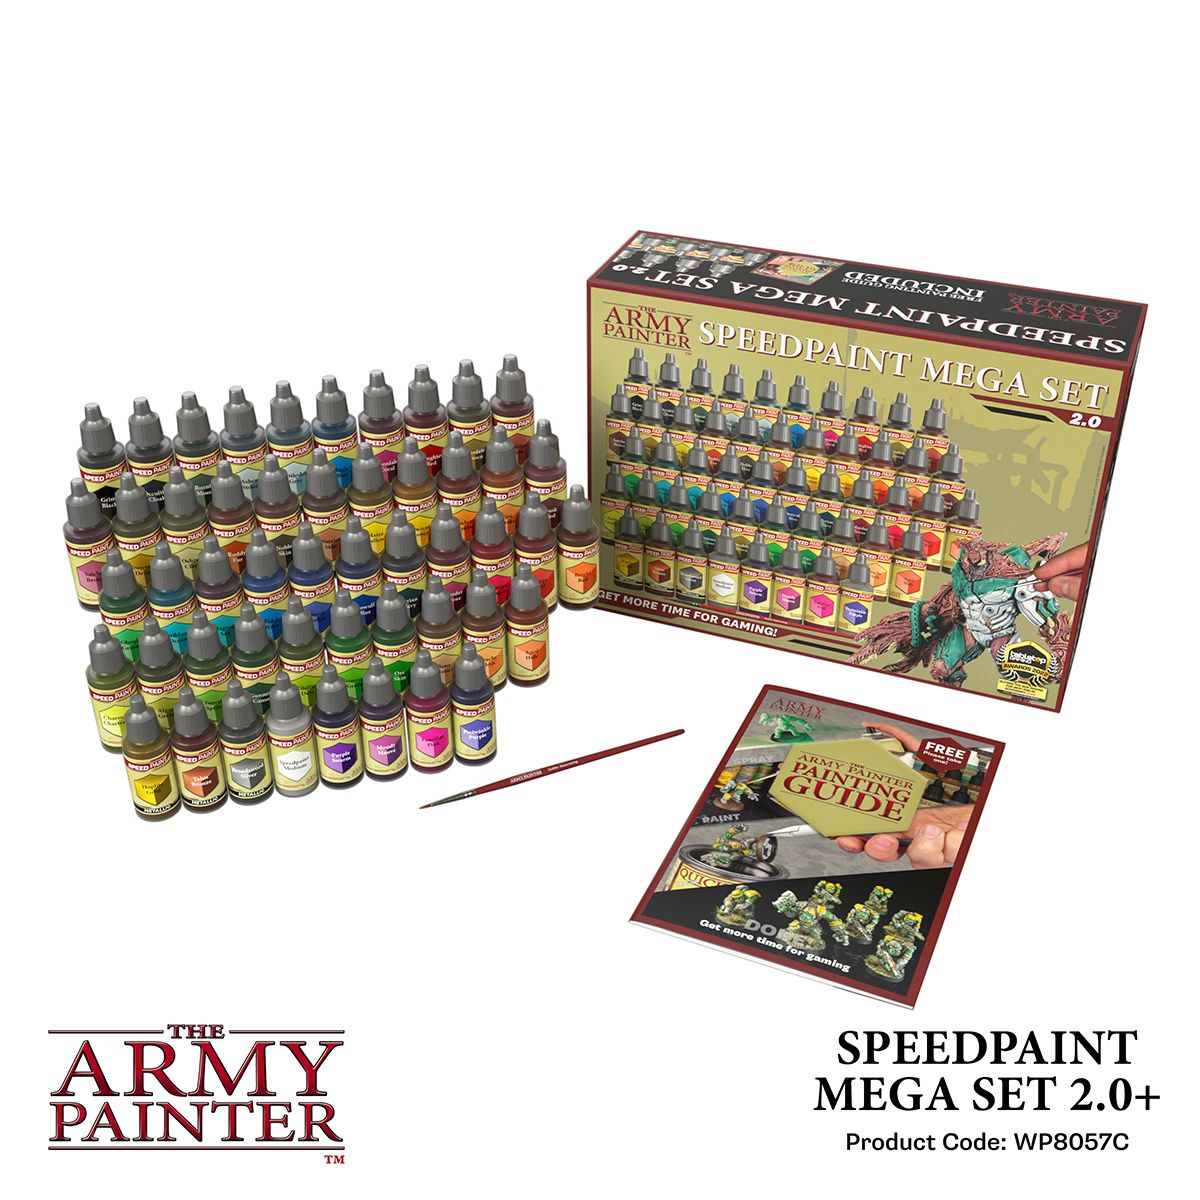 New MEGA Paint Sets & Colors From Army Painter